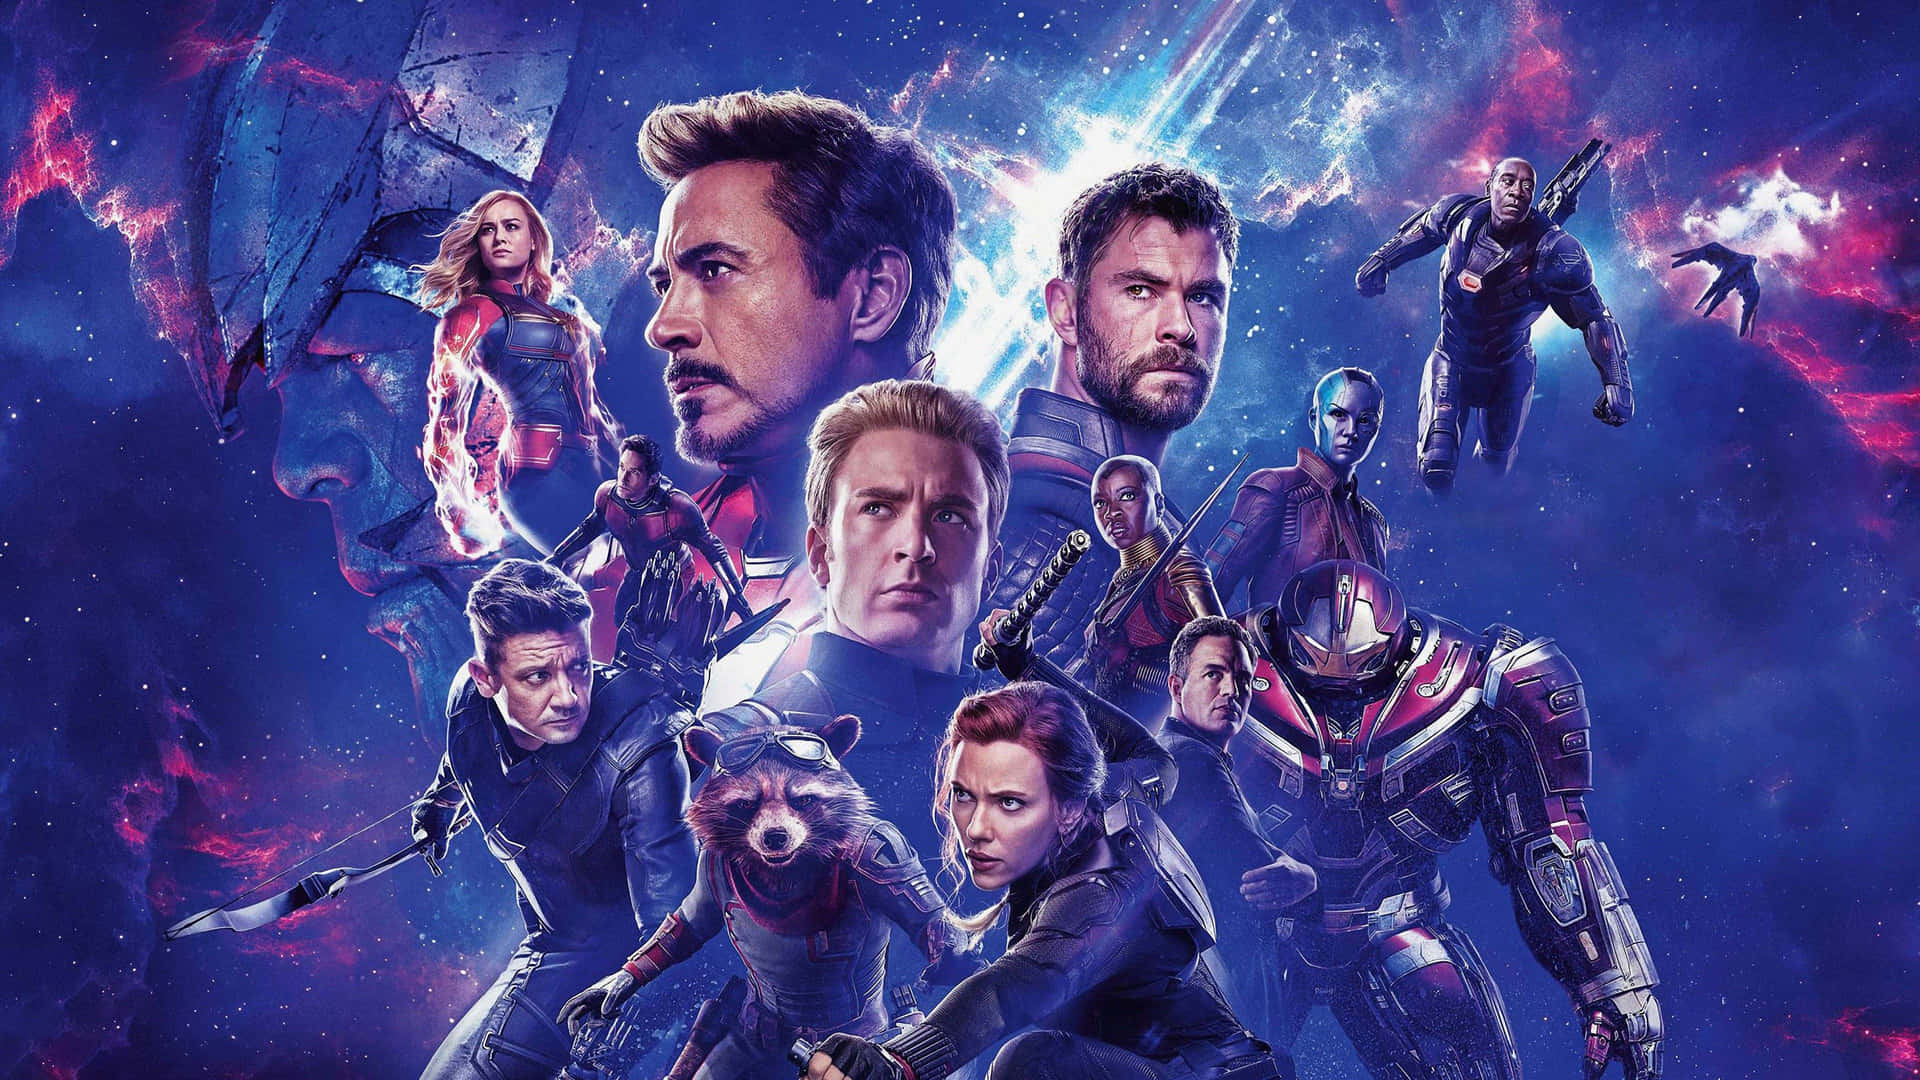 Protect the universe with Earth's Mightiest Heroes in Avengers Endgame!